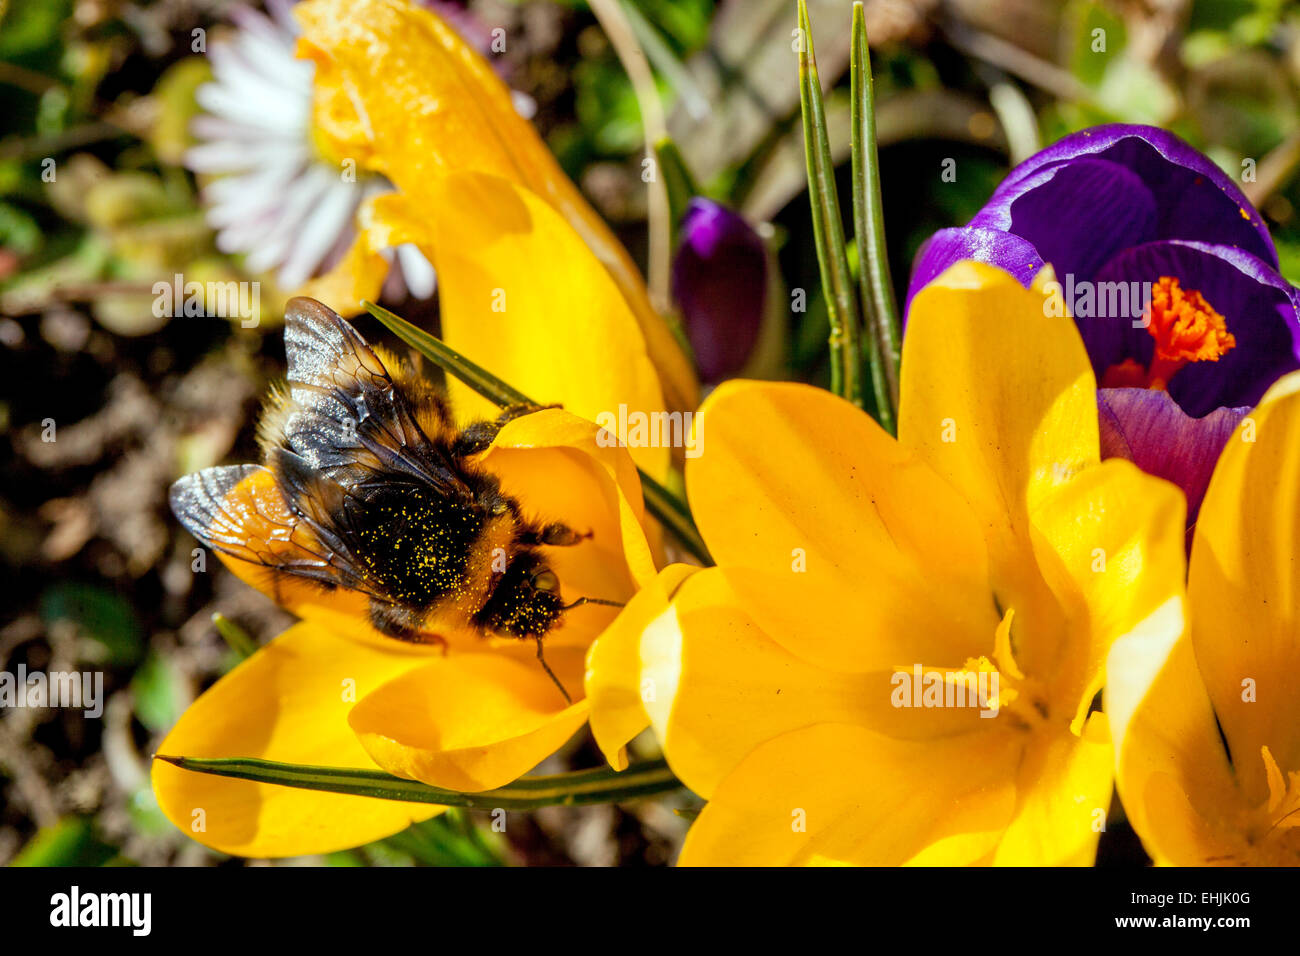 Crocus and bumble bee in crocus flower Insect Stock Photo